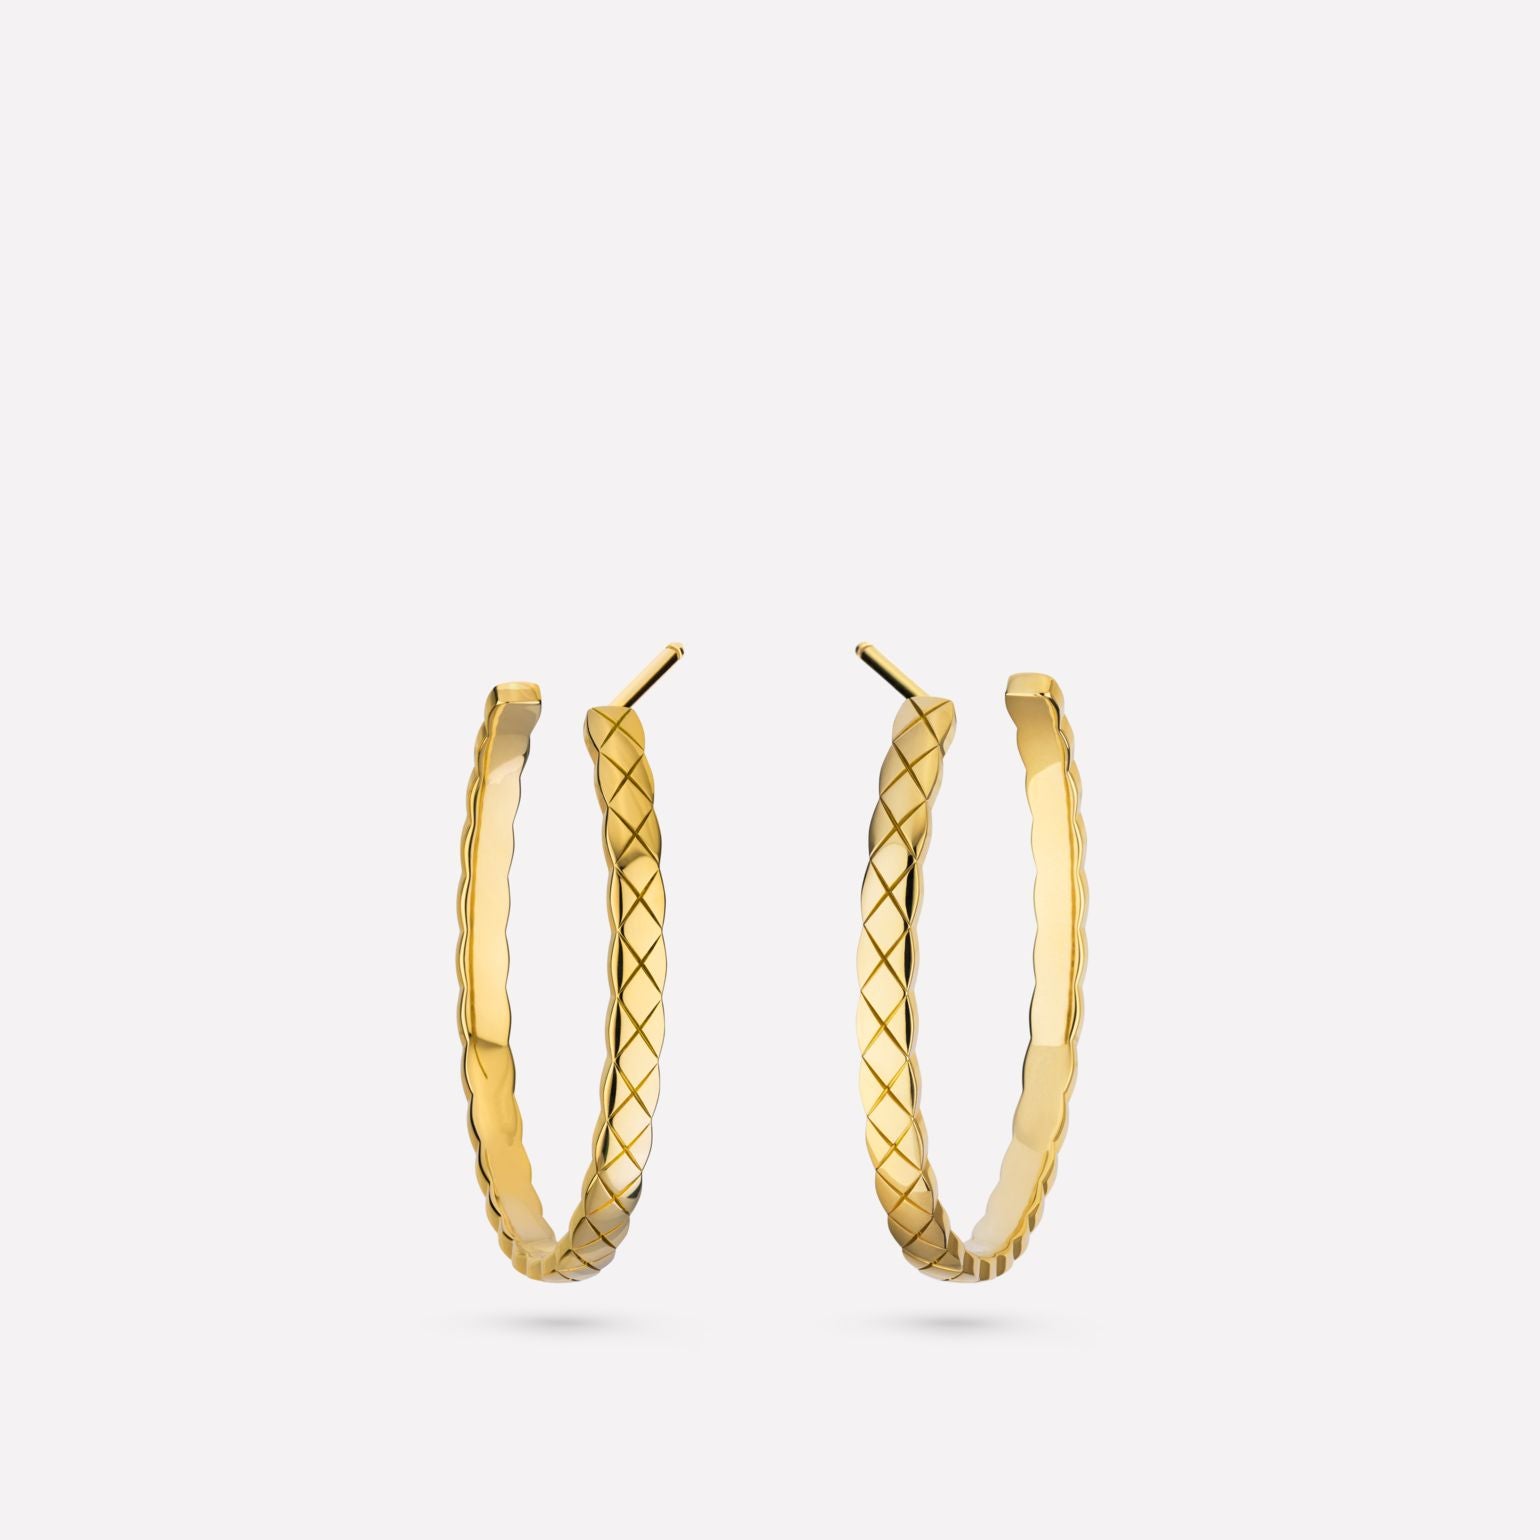 COCO HOOP EARRINGS QUILTED MOTIF, 18K YELLOW GOLD